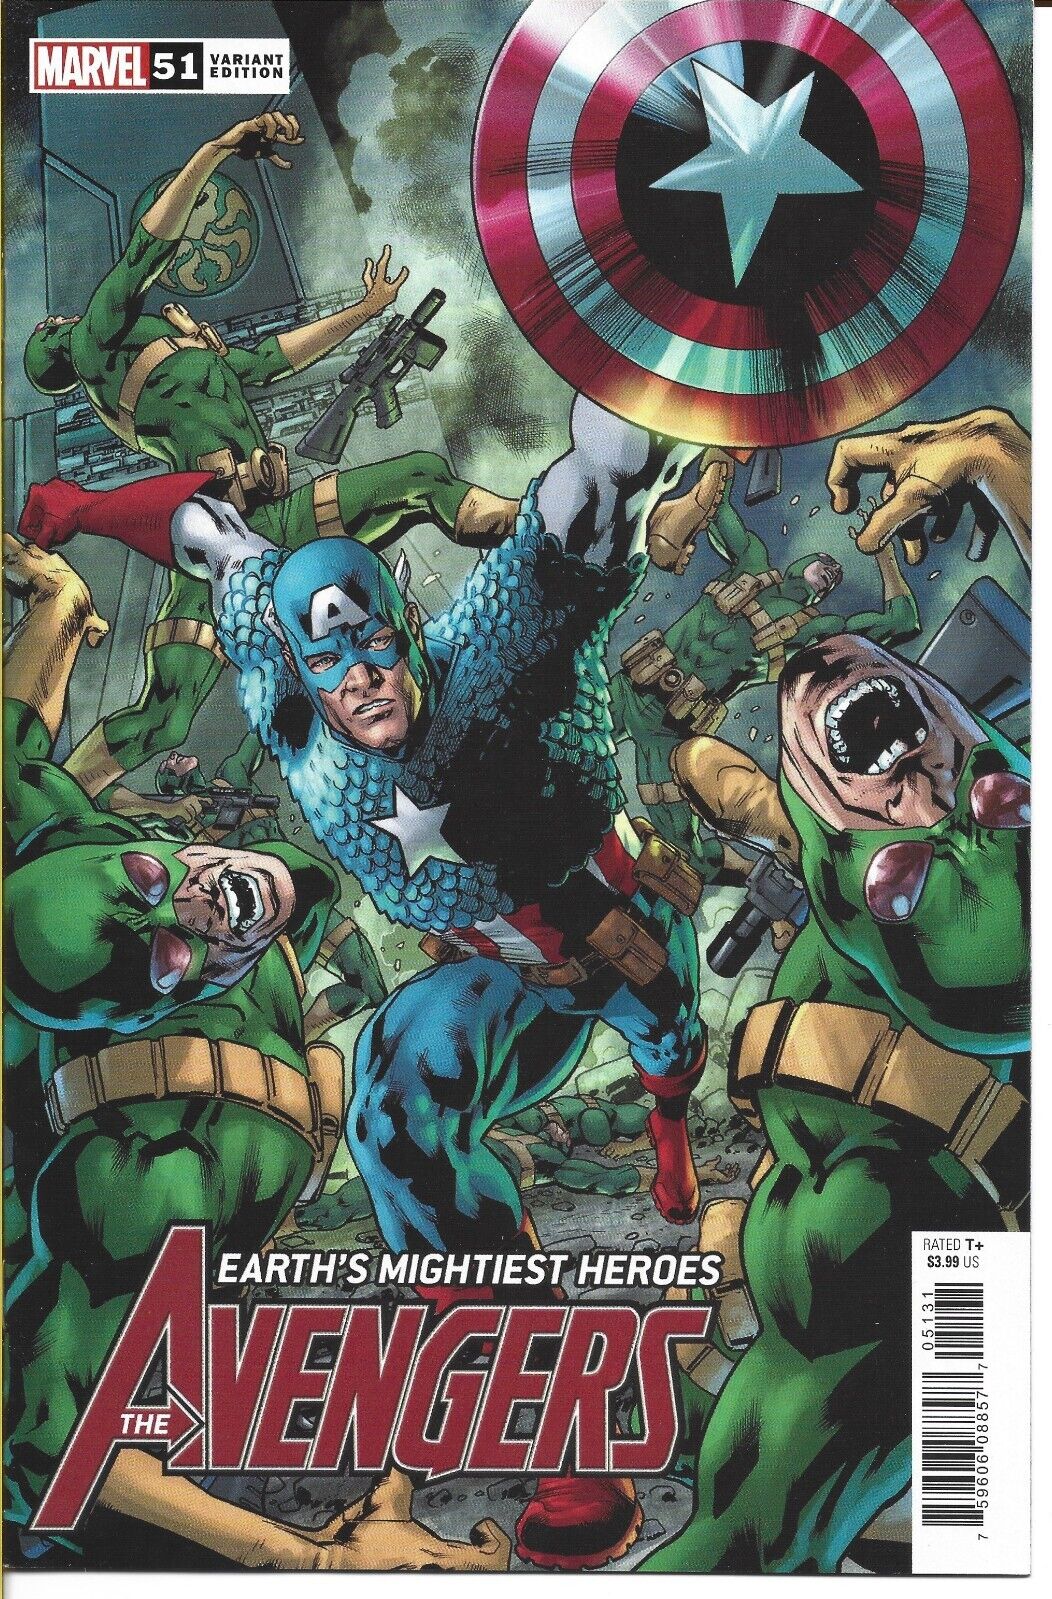 AVENGERS #51 BRYAN HITCH VARIANT MARVEL COMICS 2022 NEW UNREAD BAGGED / BOARDED